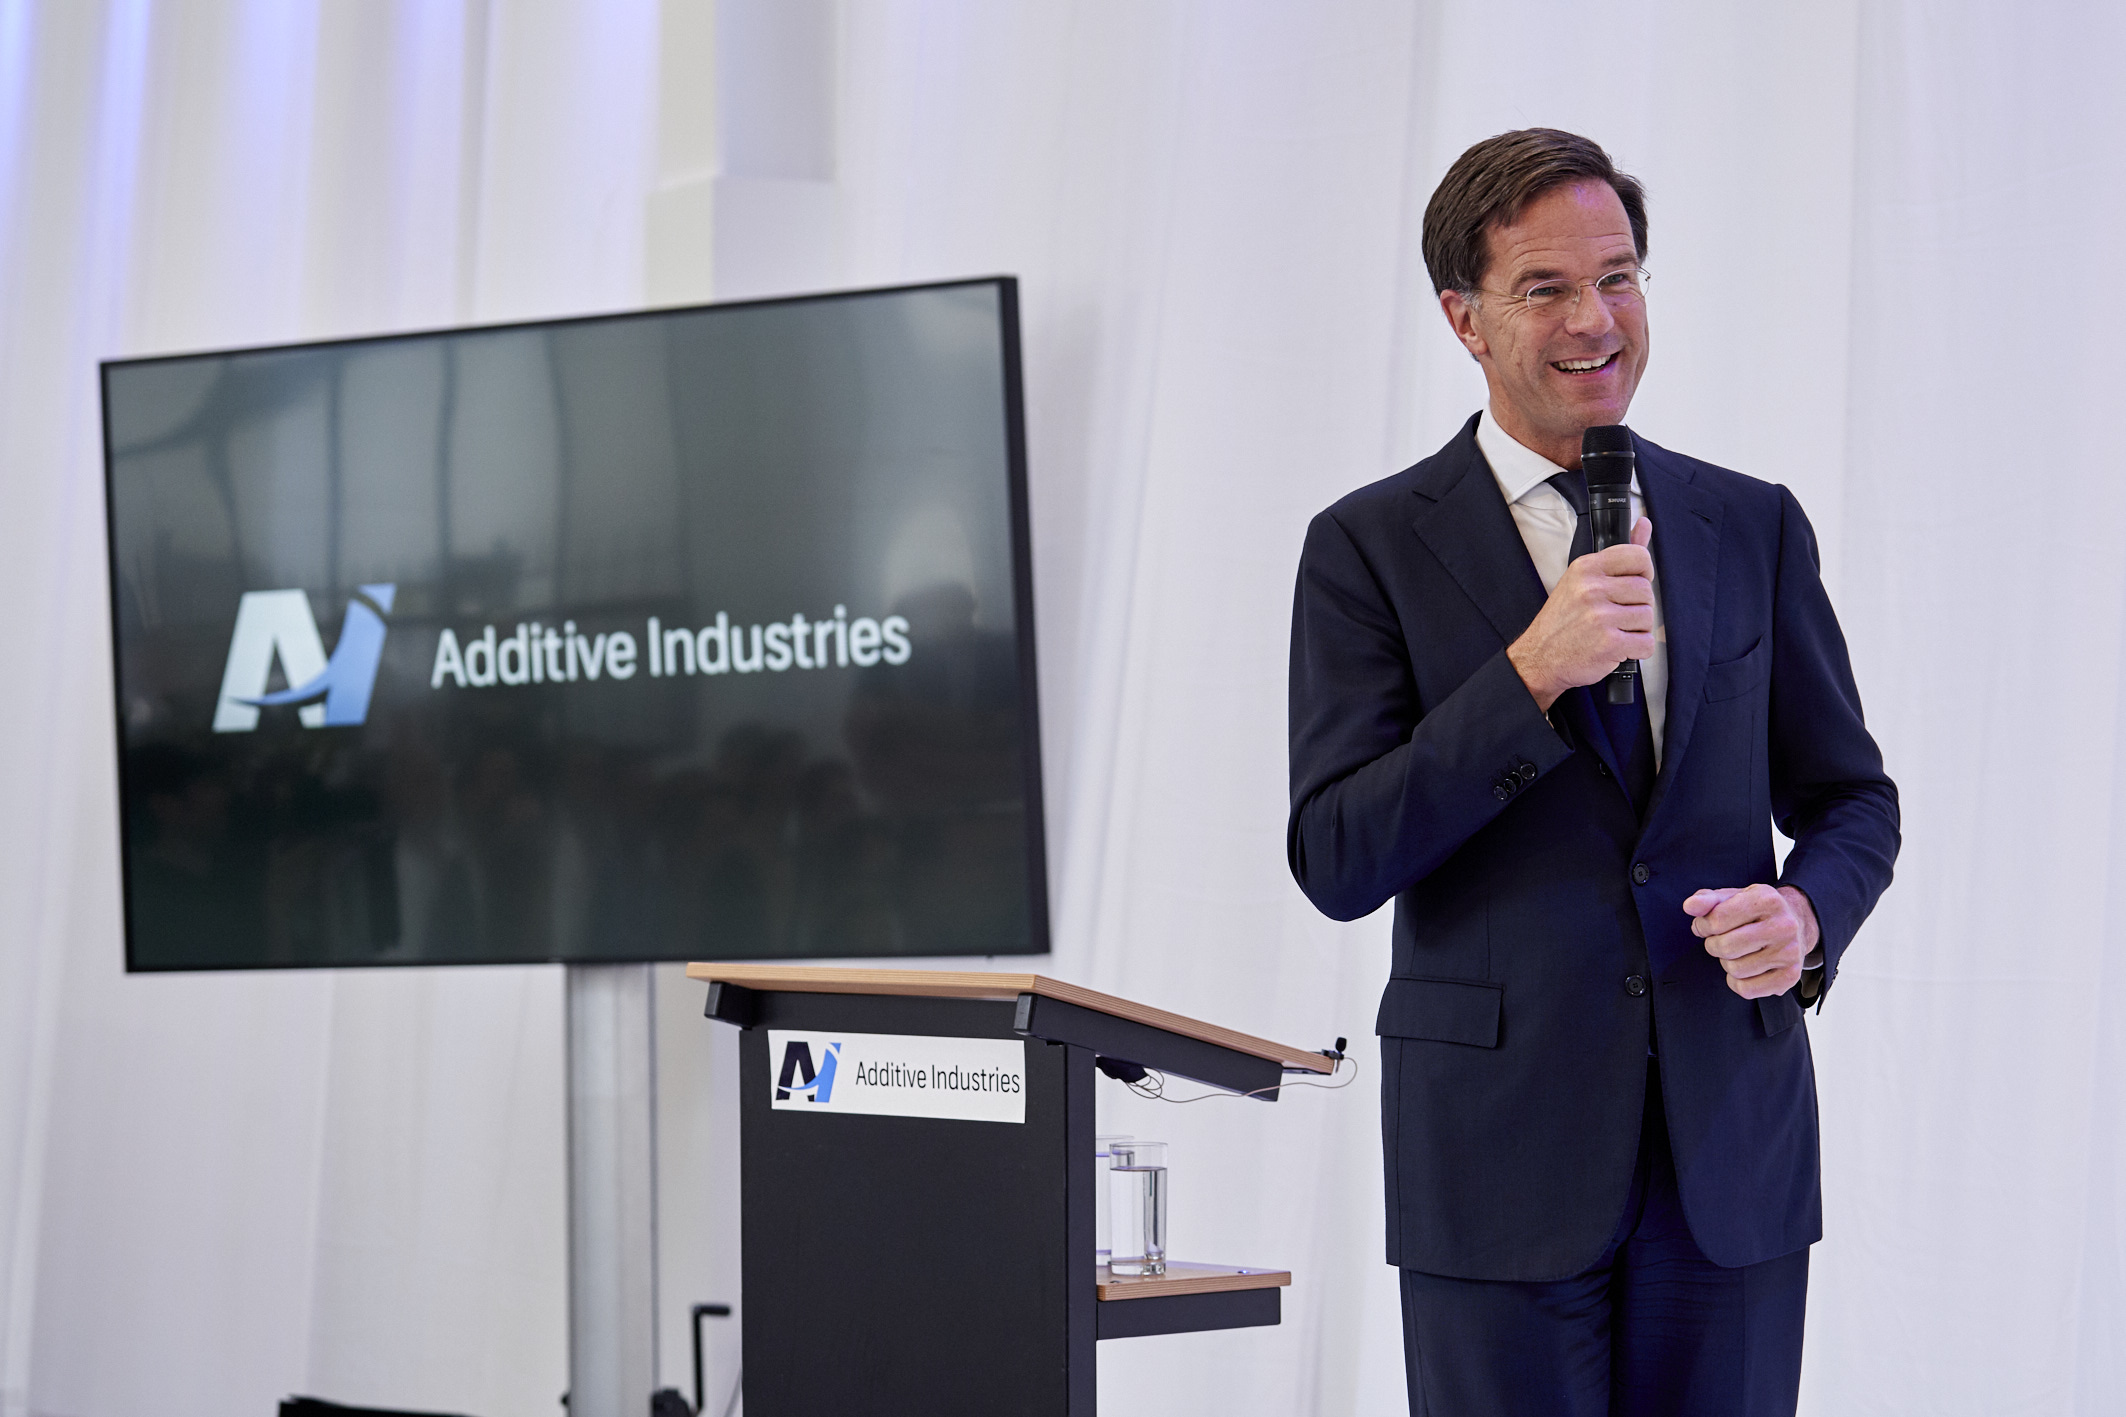 Mark Rutte has opened Additive Industries’ new facility in the Netherlands.